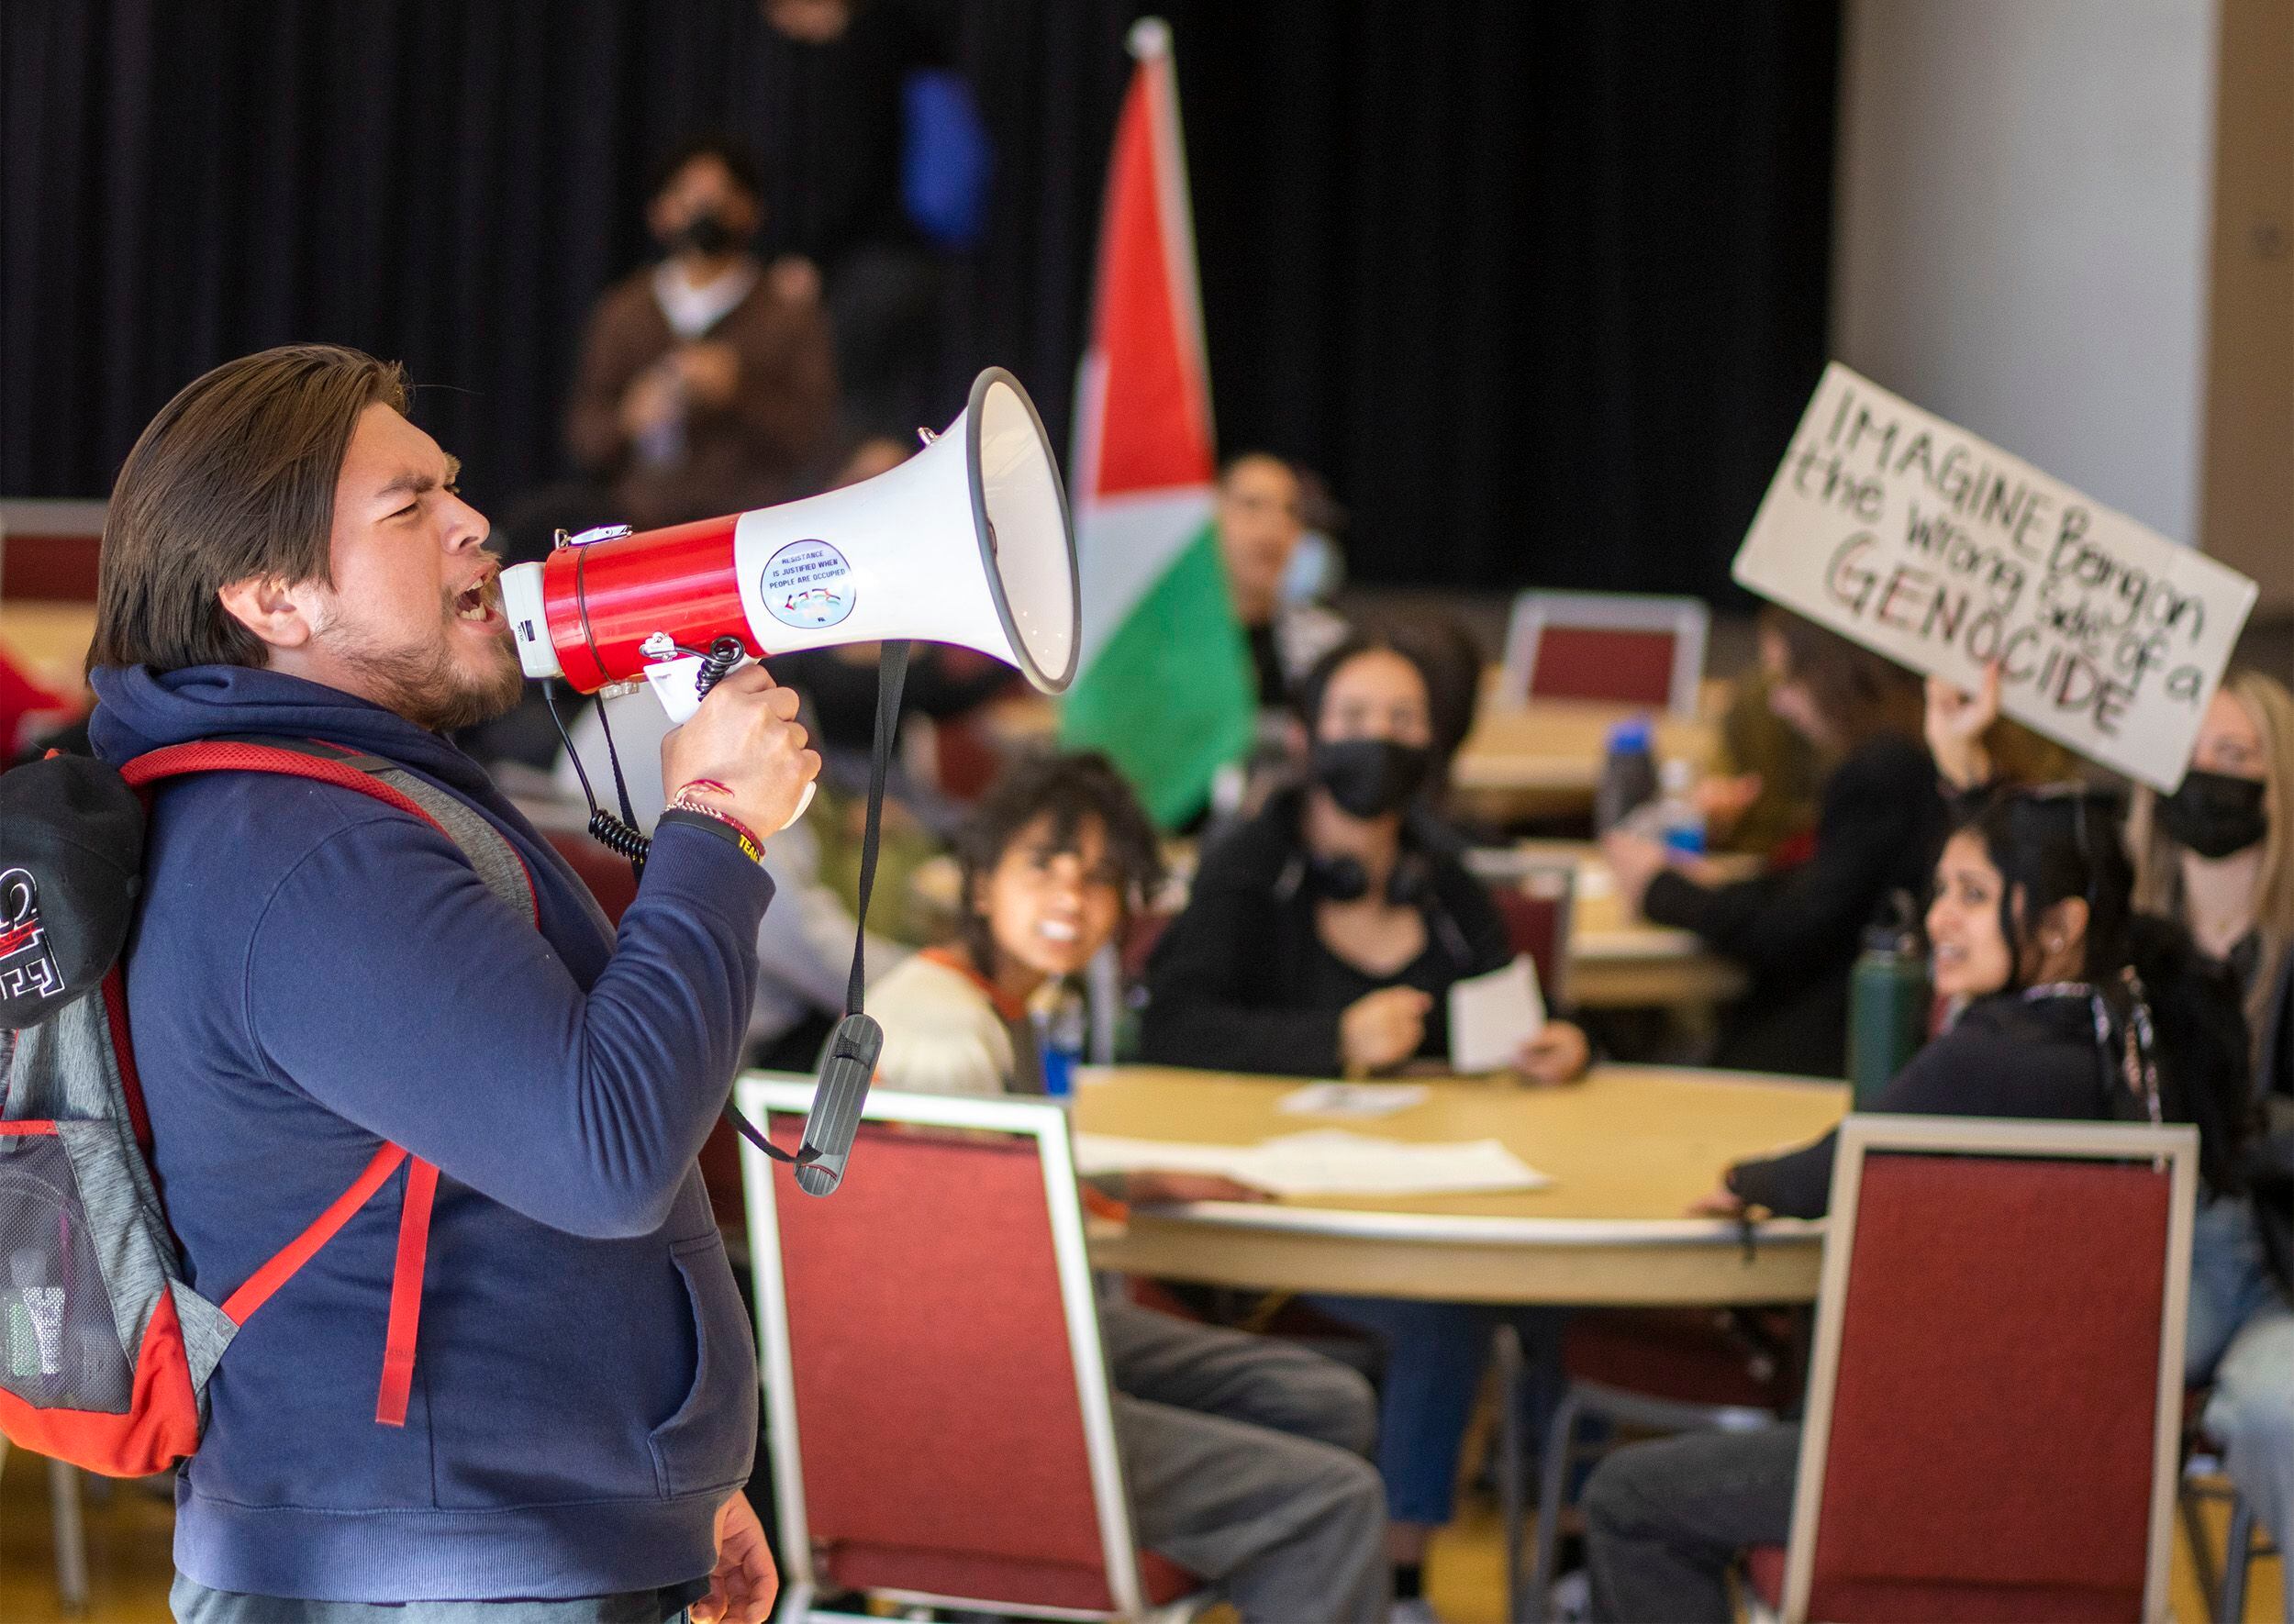 (Rick Egan | The Salt Lake Tribune) Julio Irungaray leads the crowd in a chant during a sit-in, as the group Mecha occupies the Union Ballroom during a protest on the University of Utah Campus, on Wednesday, Nov. 15, 2023.